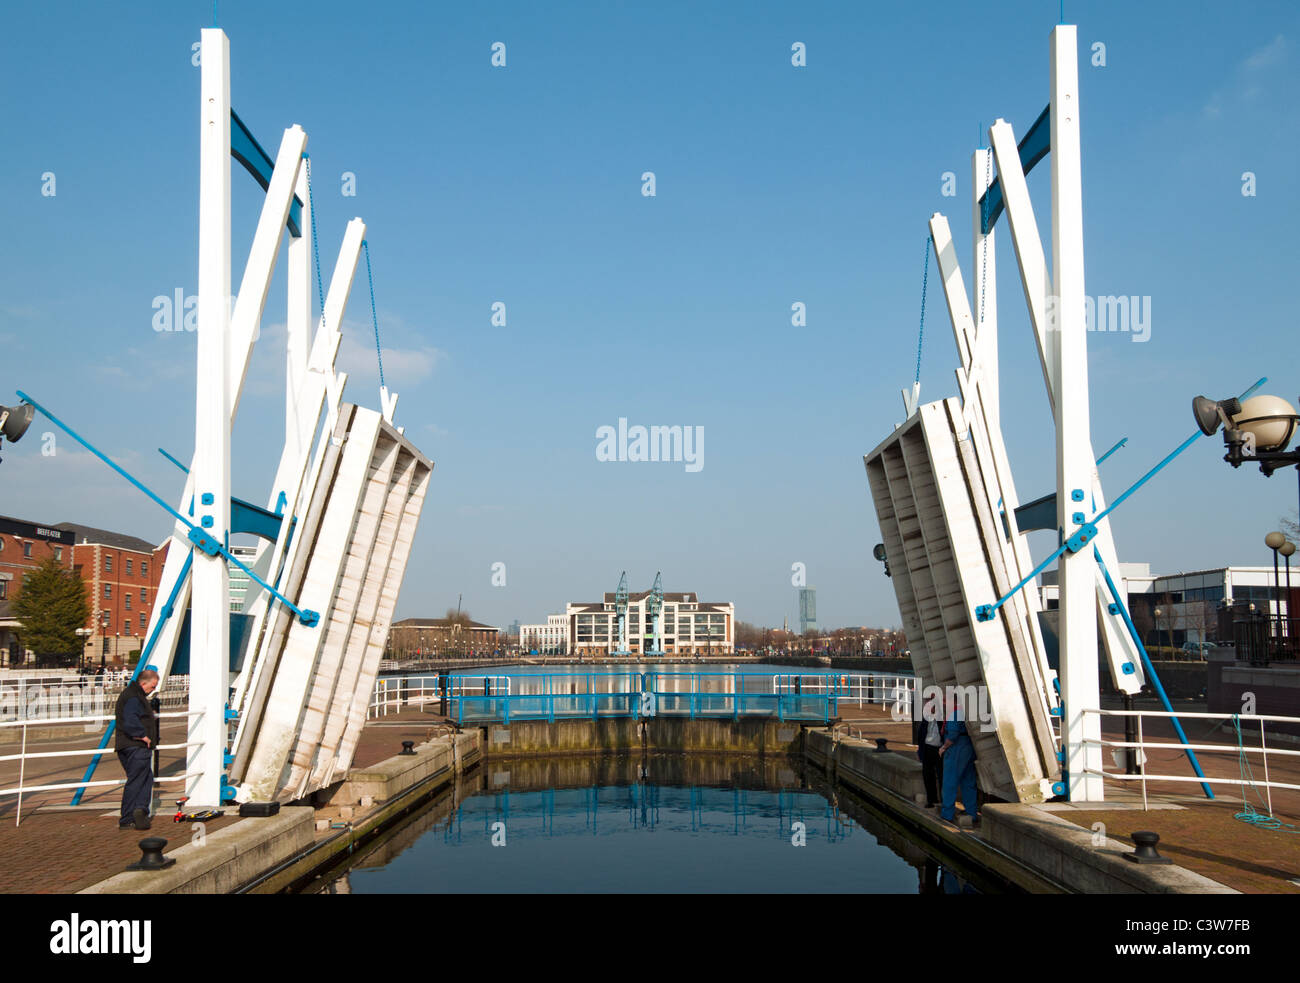 Double leaf bascule bridge at Welland Lock, Salford Quays, Manchester, England, UK.  Opened for maintenance. Stock Photo